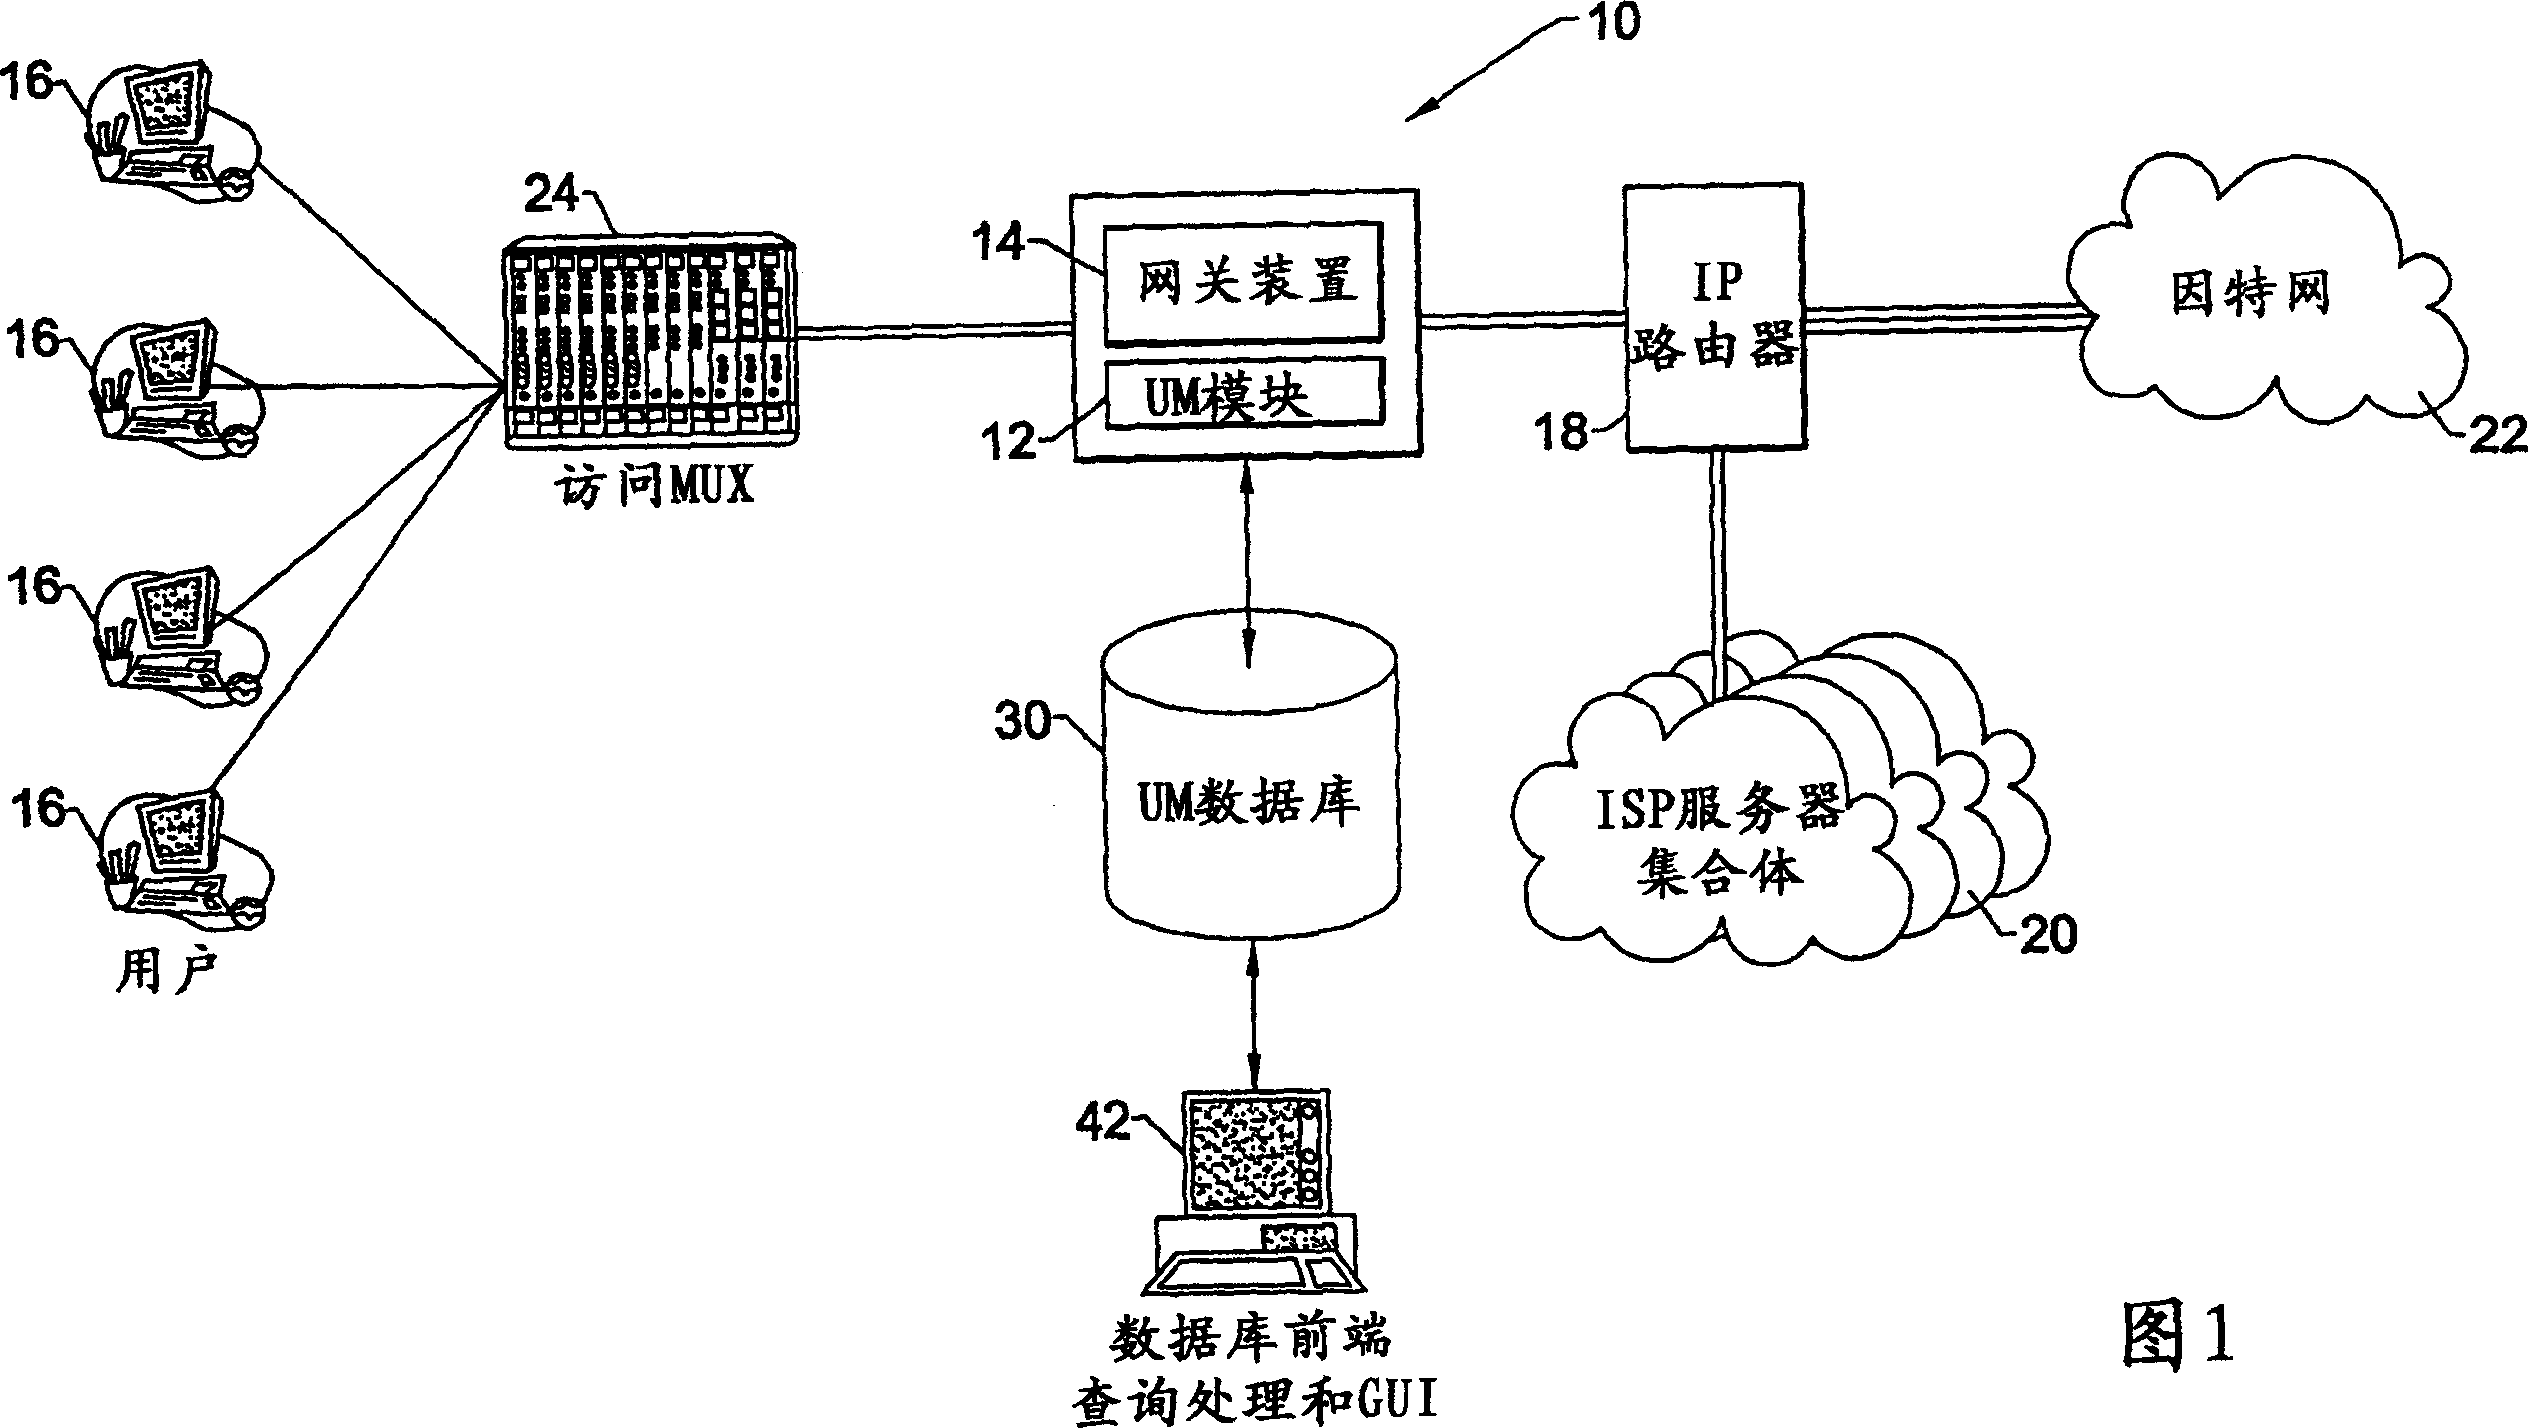 Network usage monitoring device and associated method